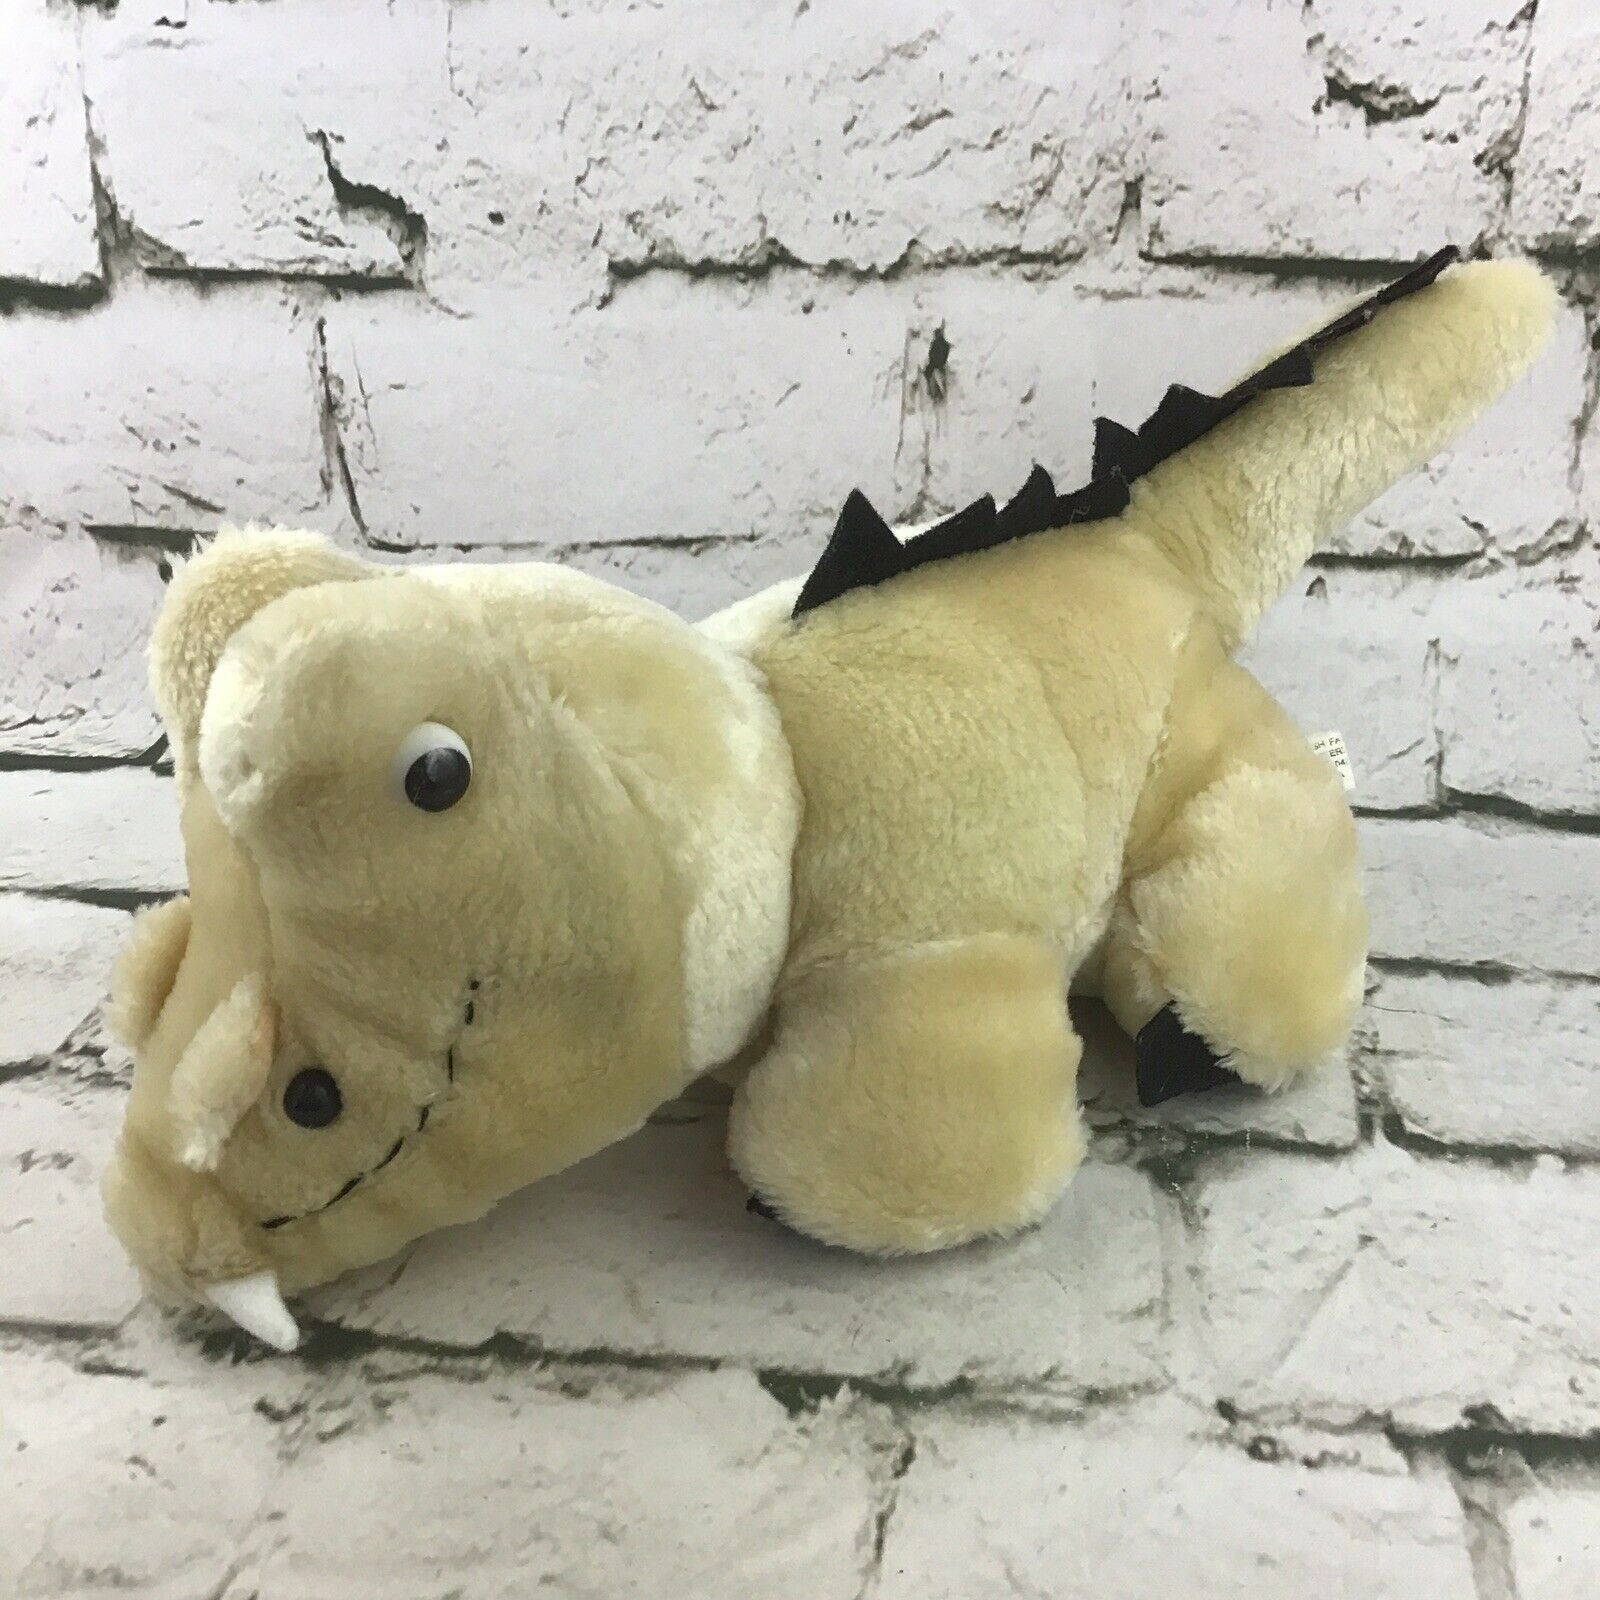 Primary image for Vintage Plush Dinosaur Tan Felt Spikes Collectible Stuffed Animal Jurassic Toy